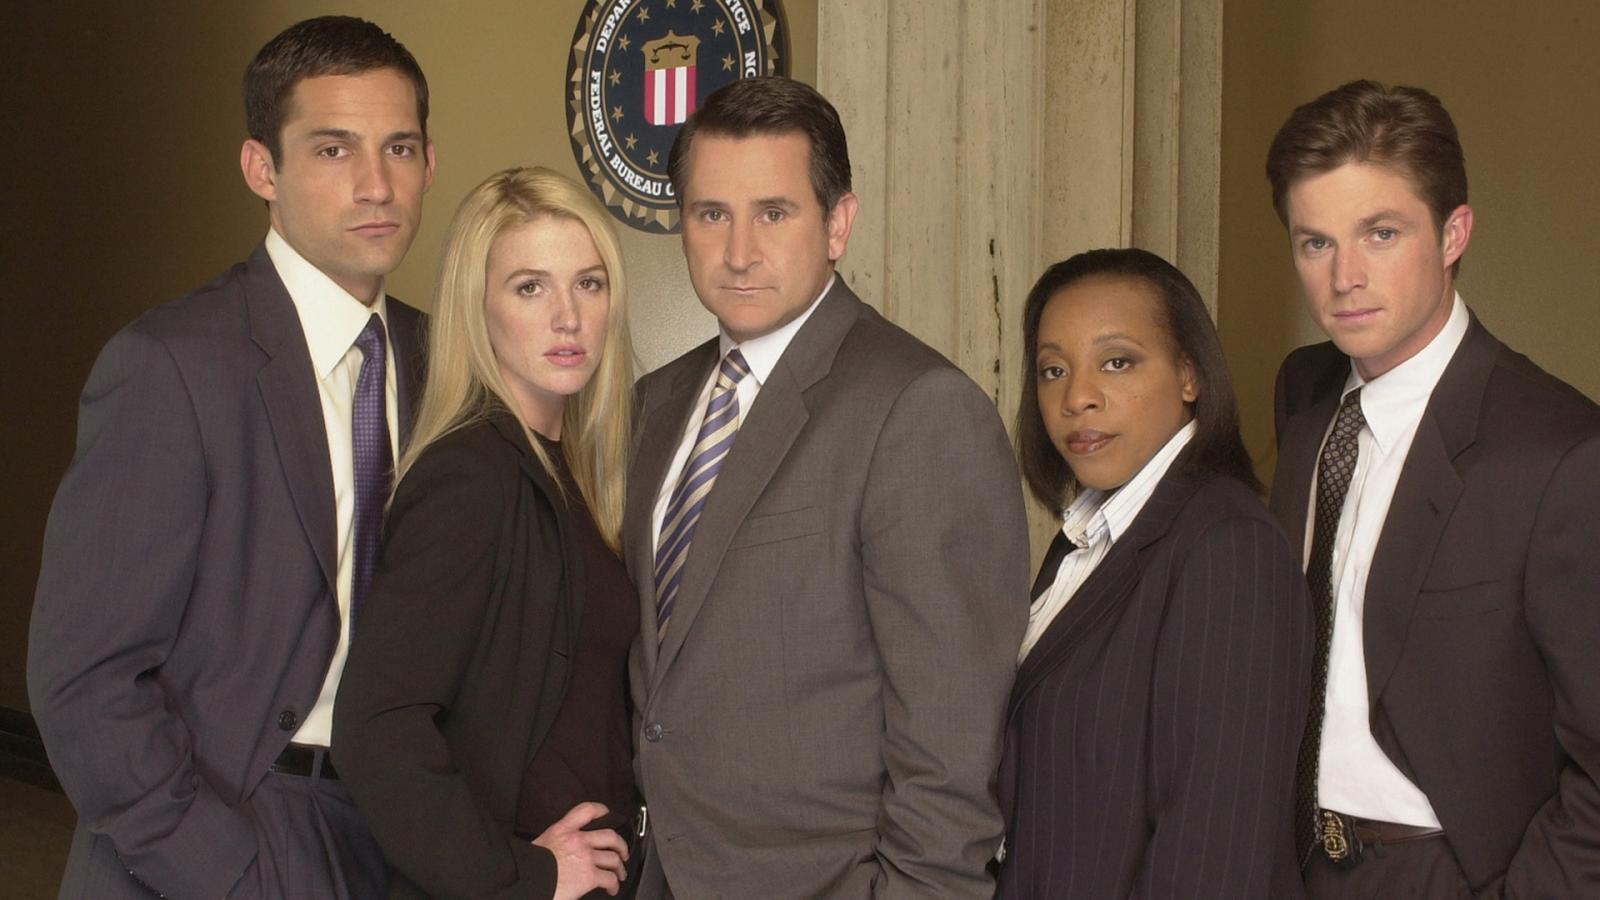 15 Procedural TV Series Like Blue Bloods the Whole Family Can Watch - image 8